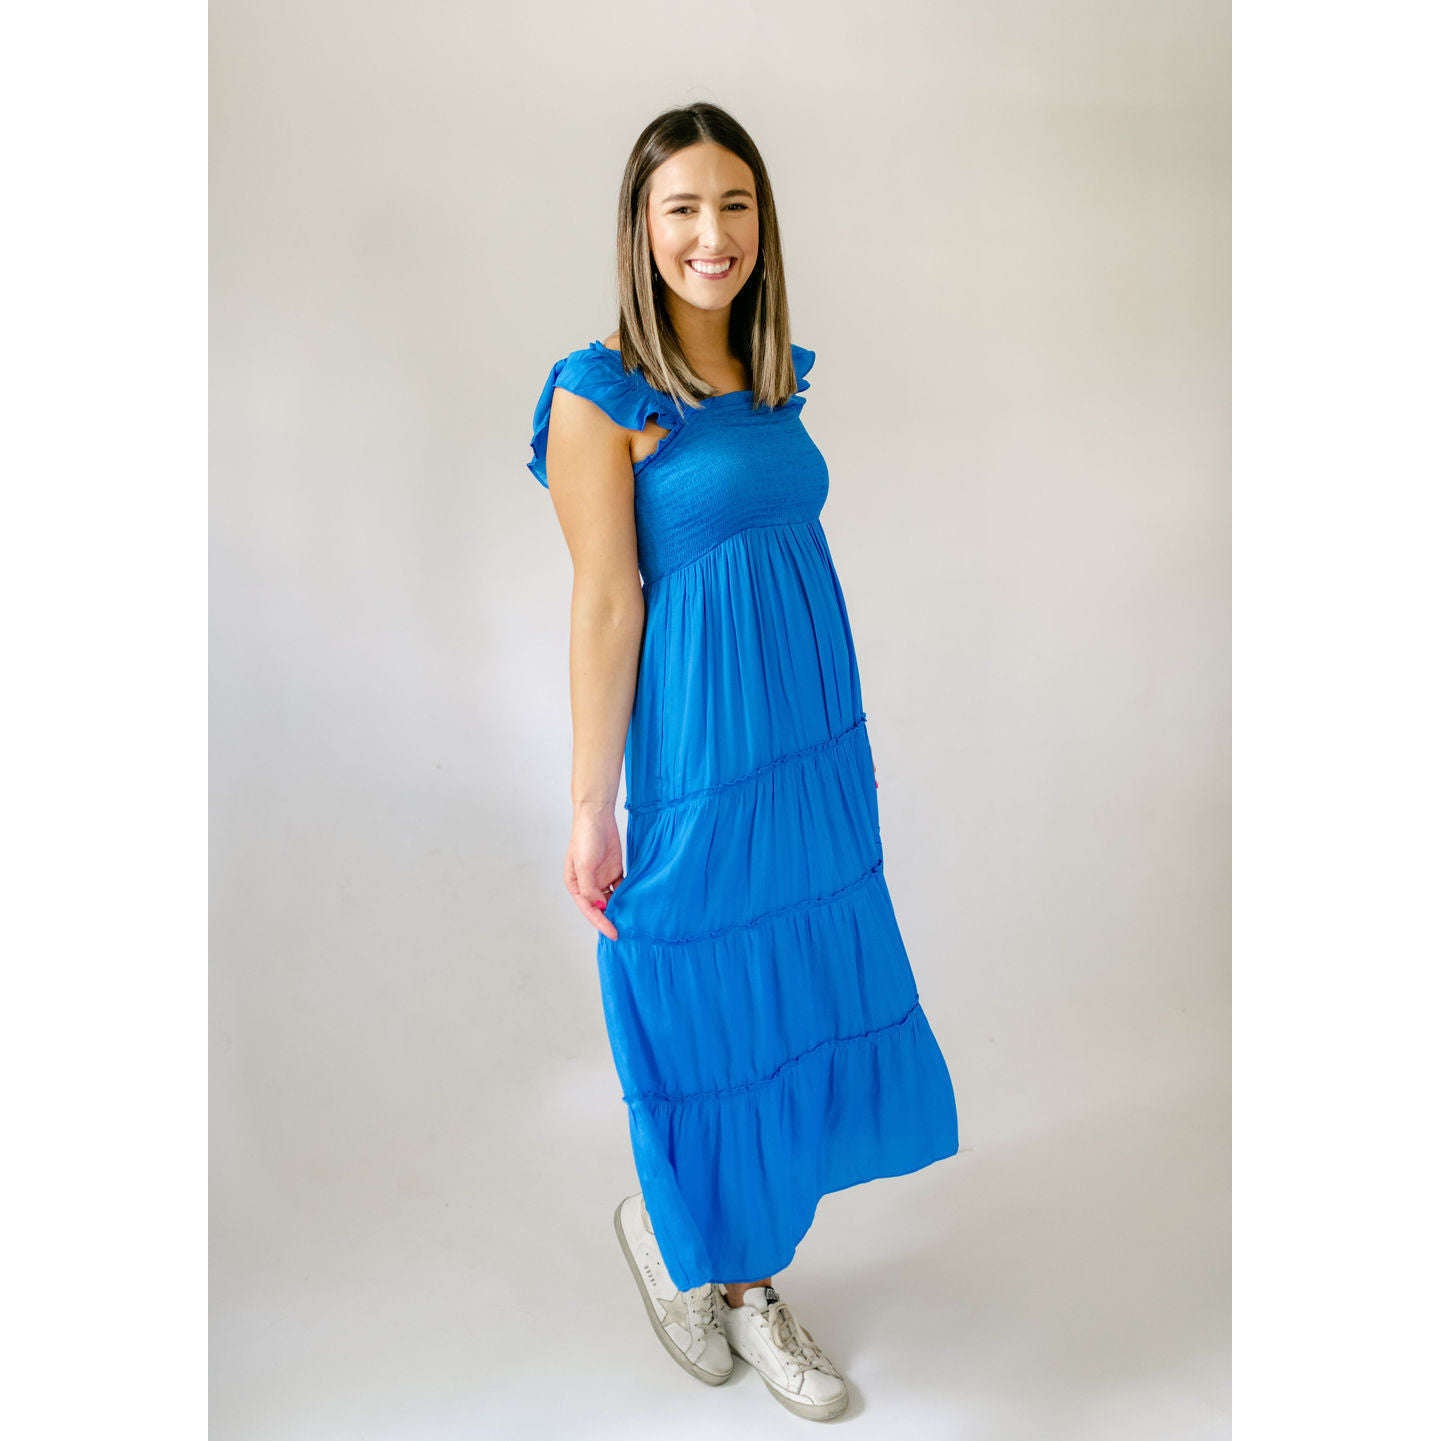 8.28 Boutique:8.28 Boutique,The Gator Smocked Top Midi Dress,Dress